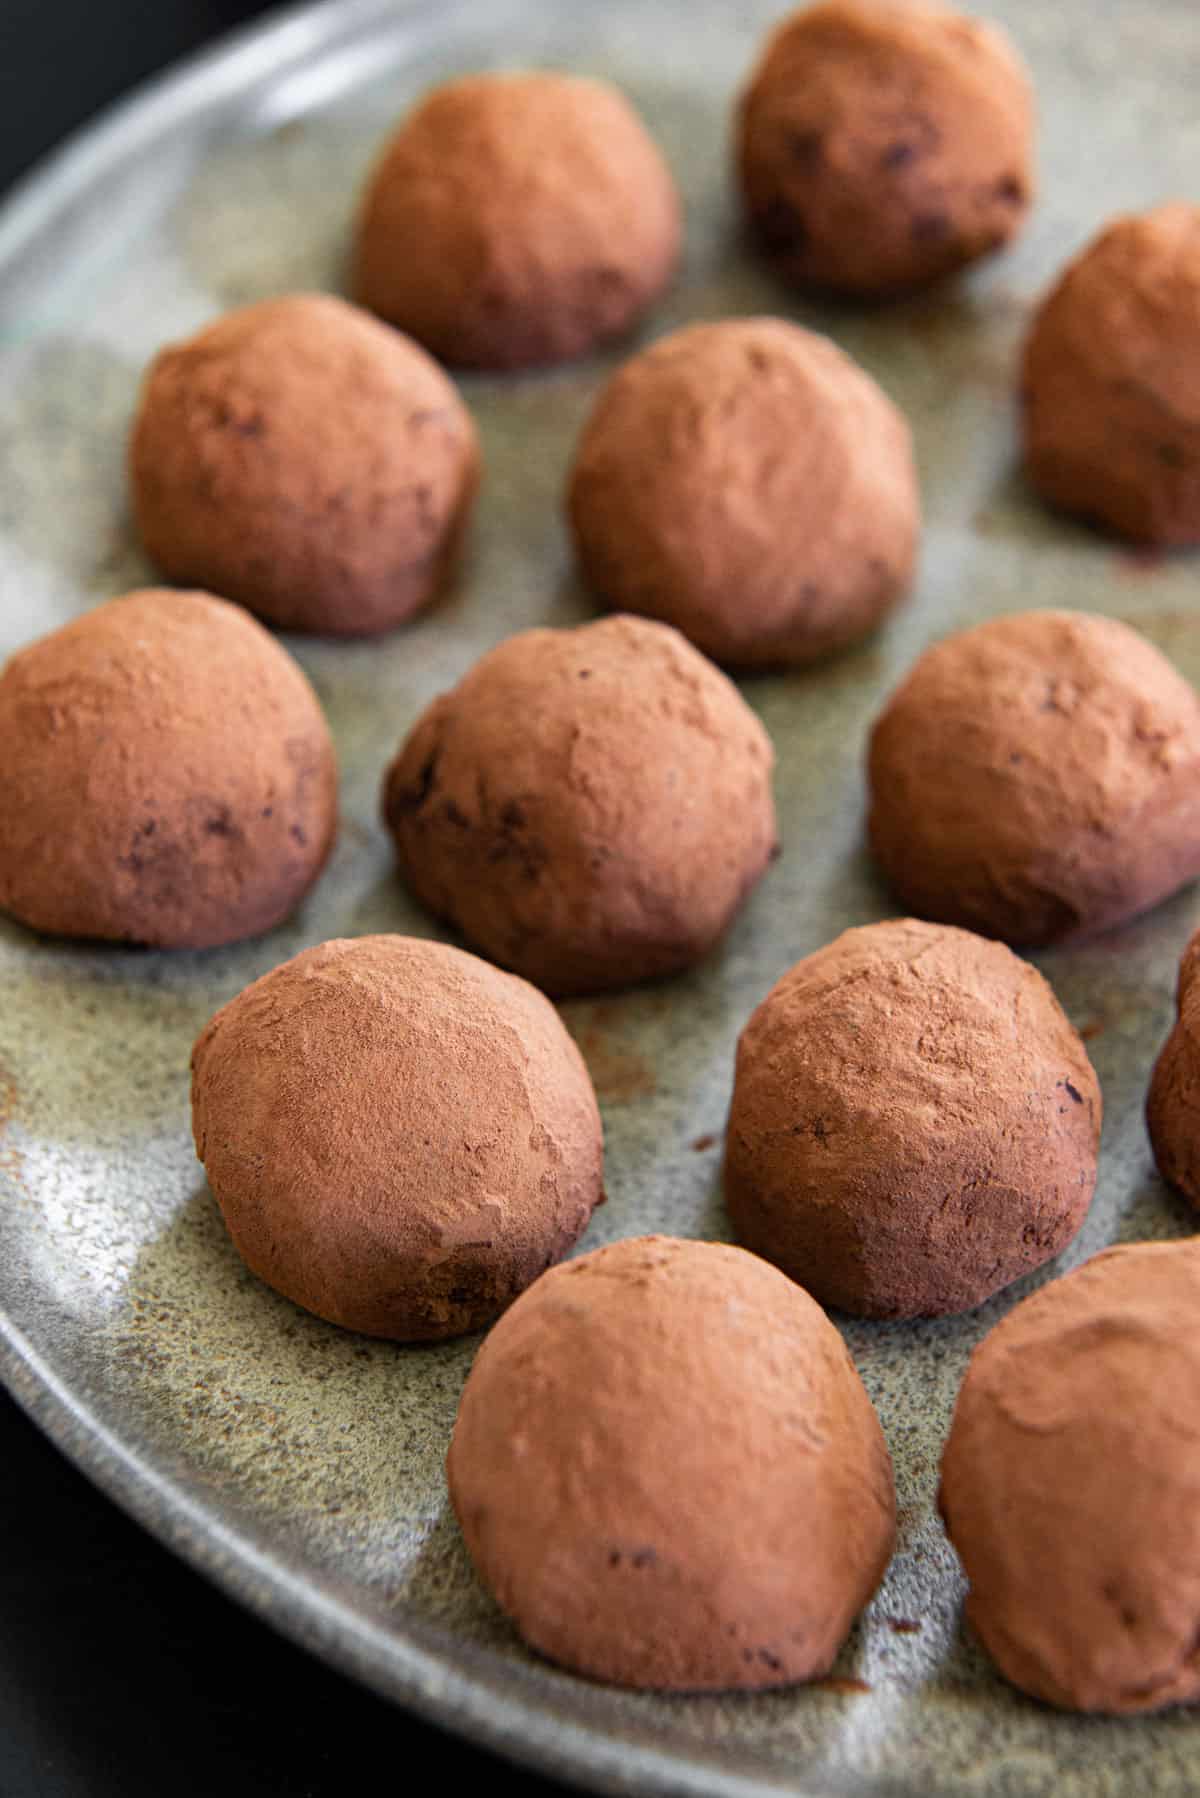 Homemade Chocolate Truffles On a Plate with Cocoa Powder Coating